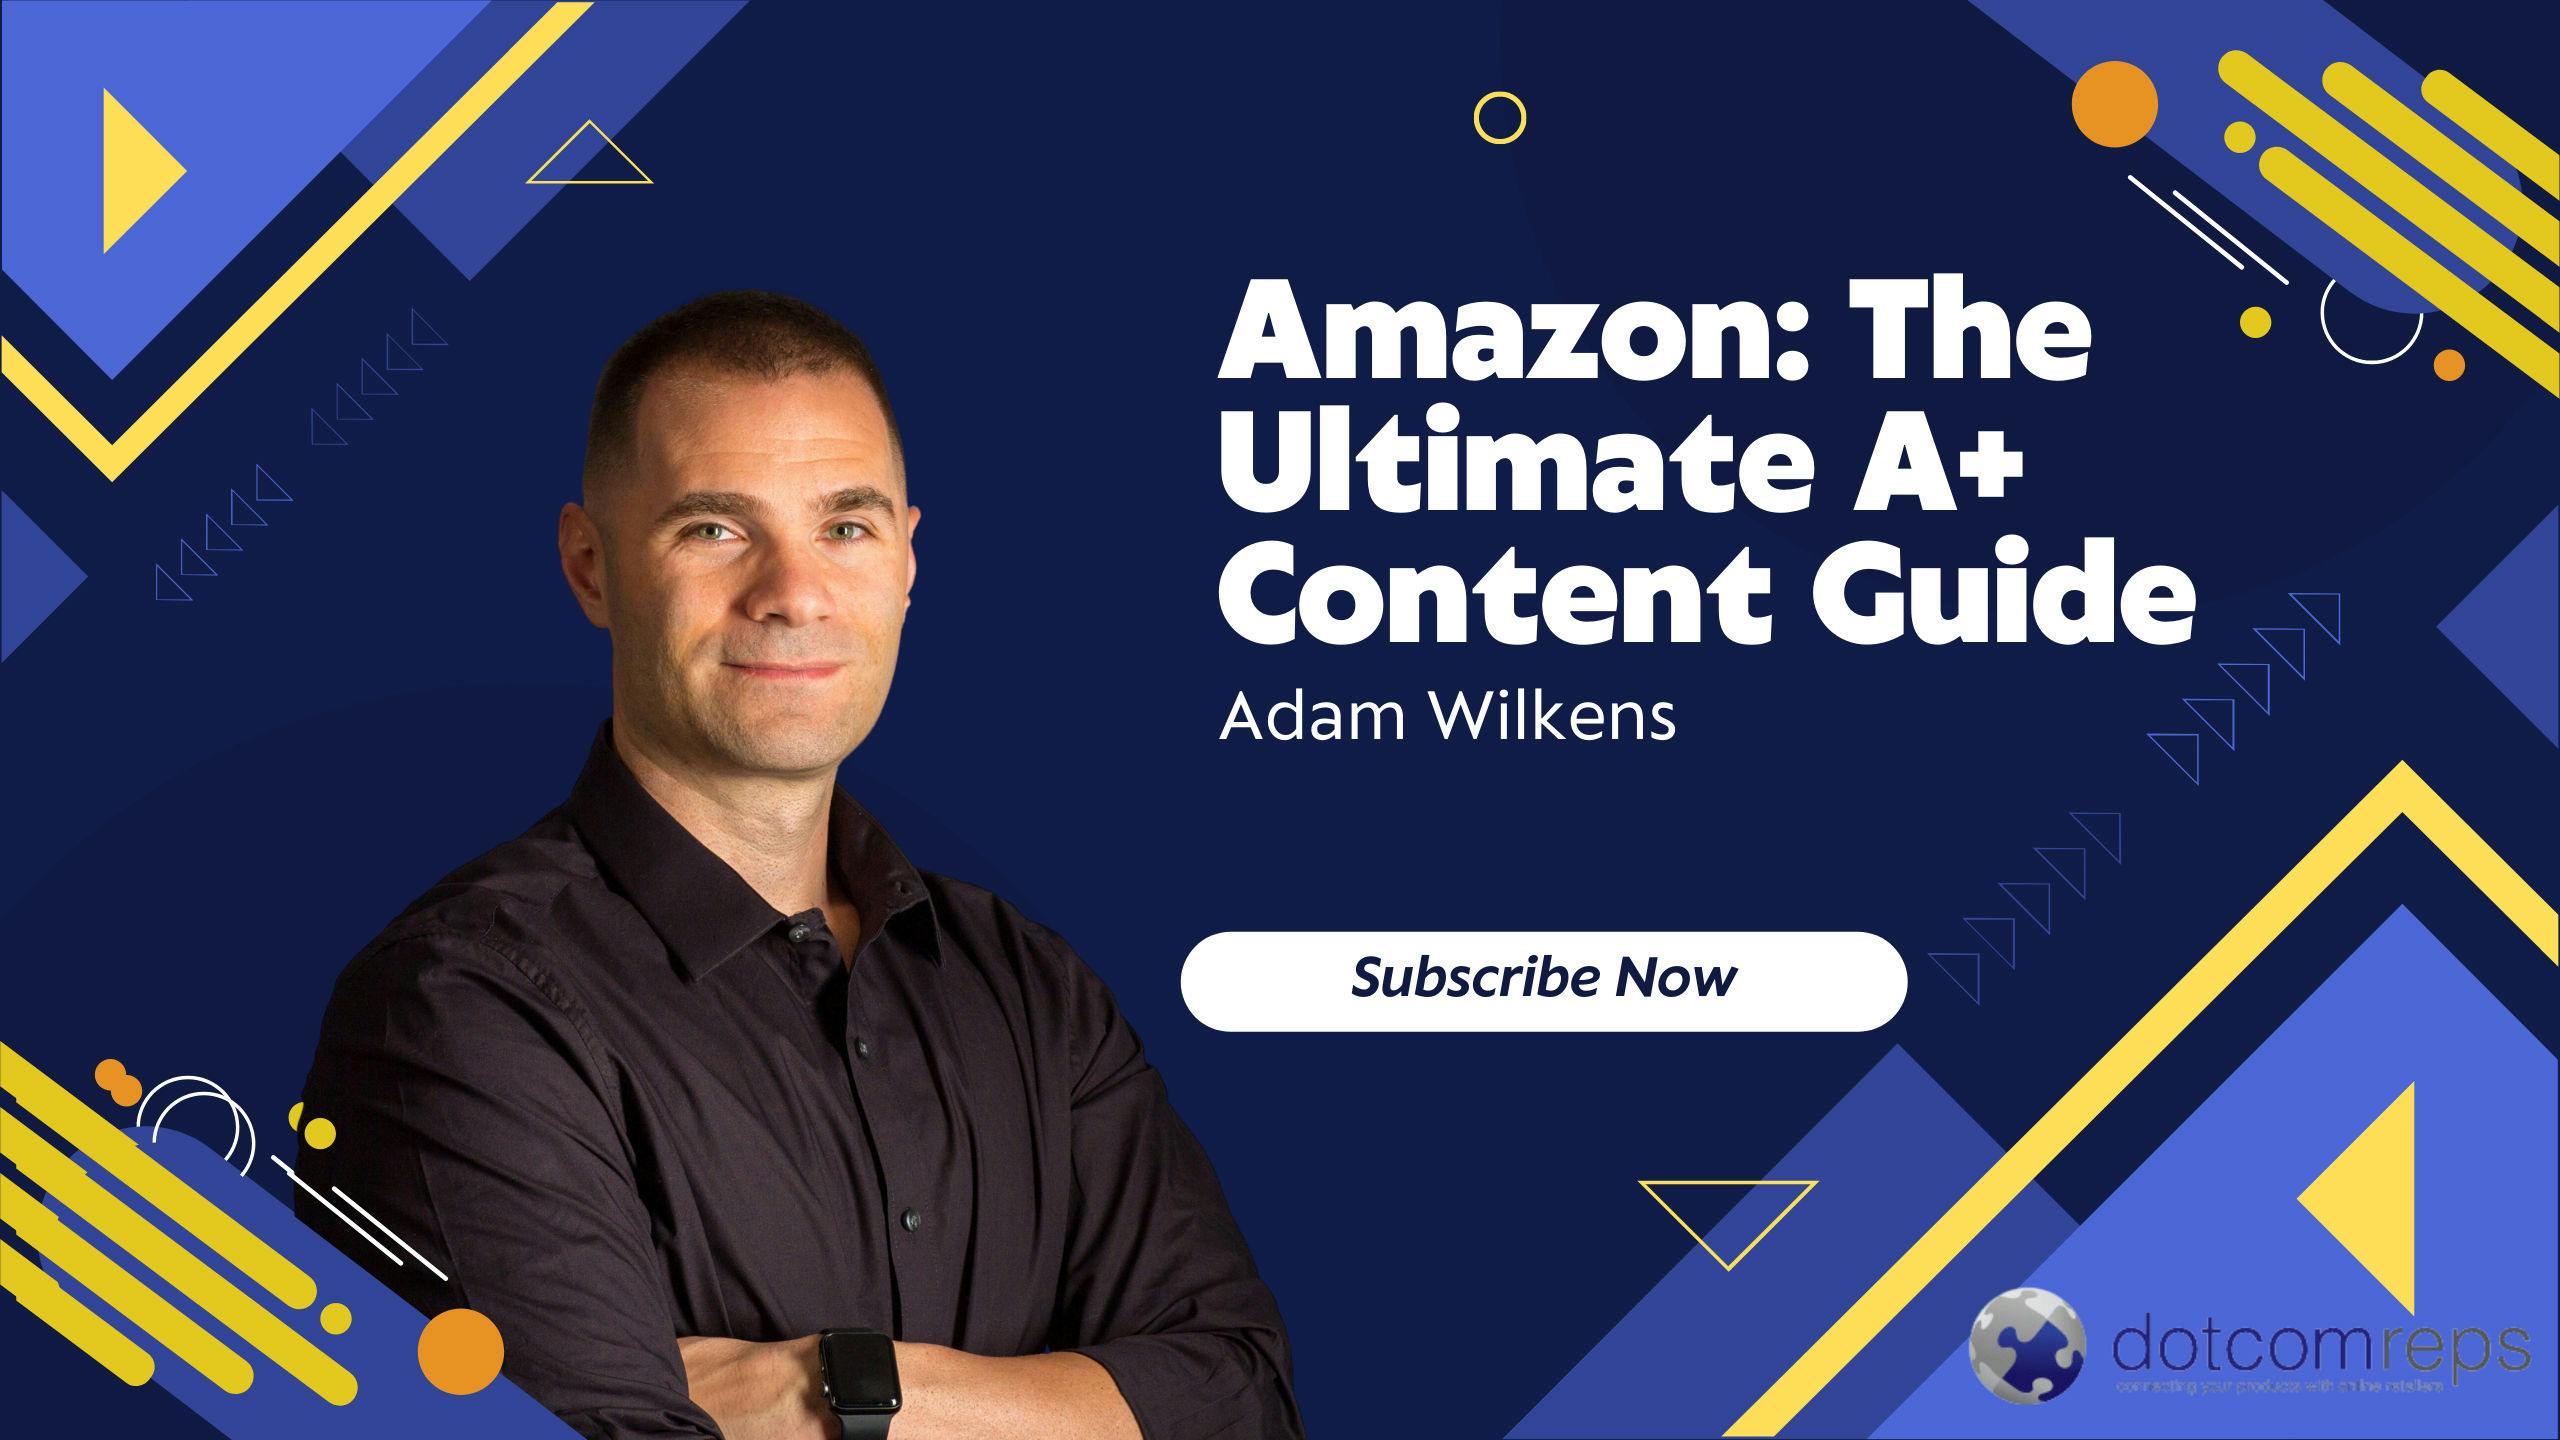 Amazon A+ Content Guide.png